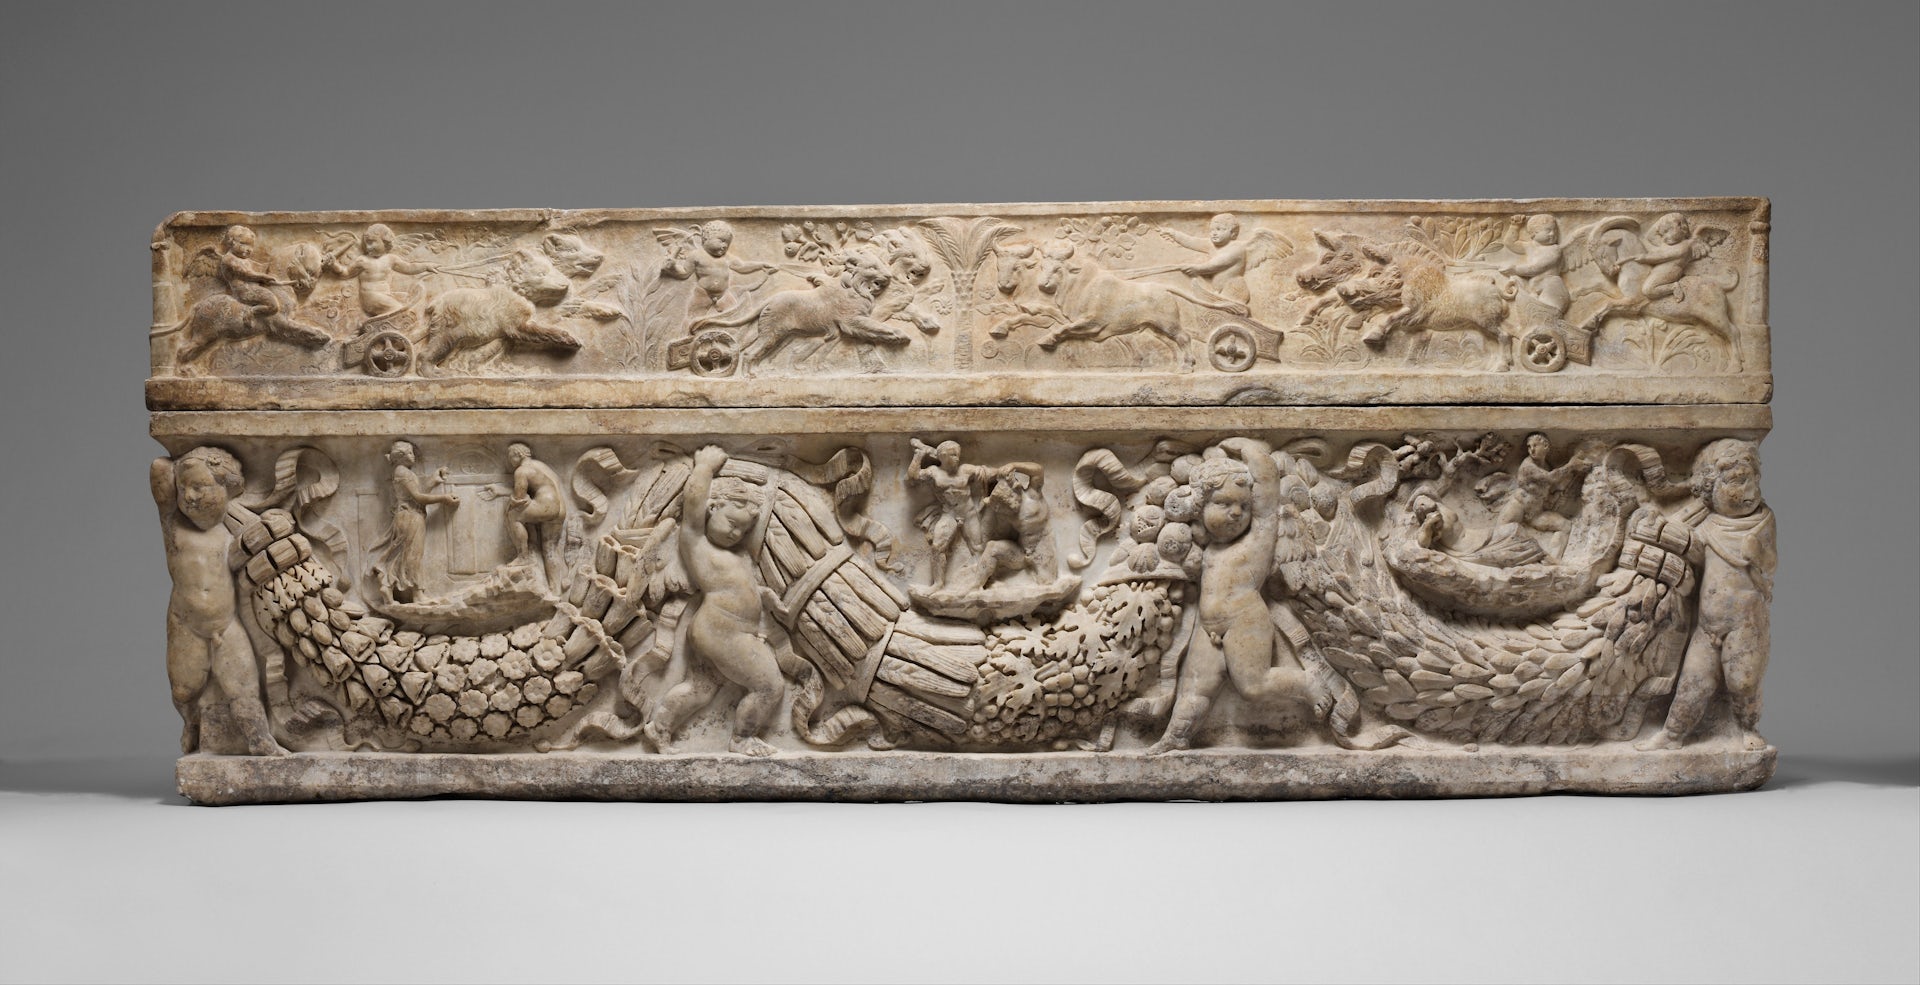 Roman marble sarcophagus with garlands and the myth of Theseus and Ariadne